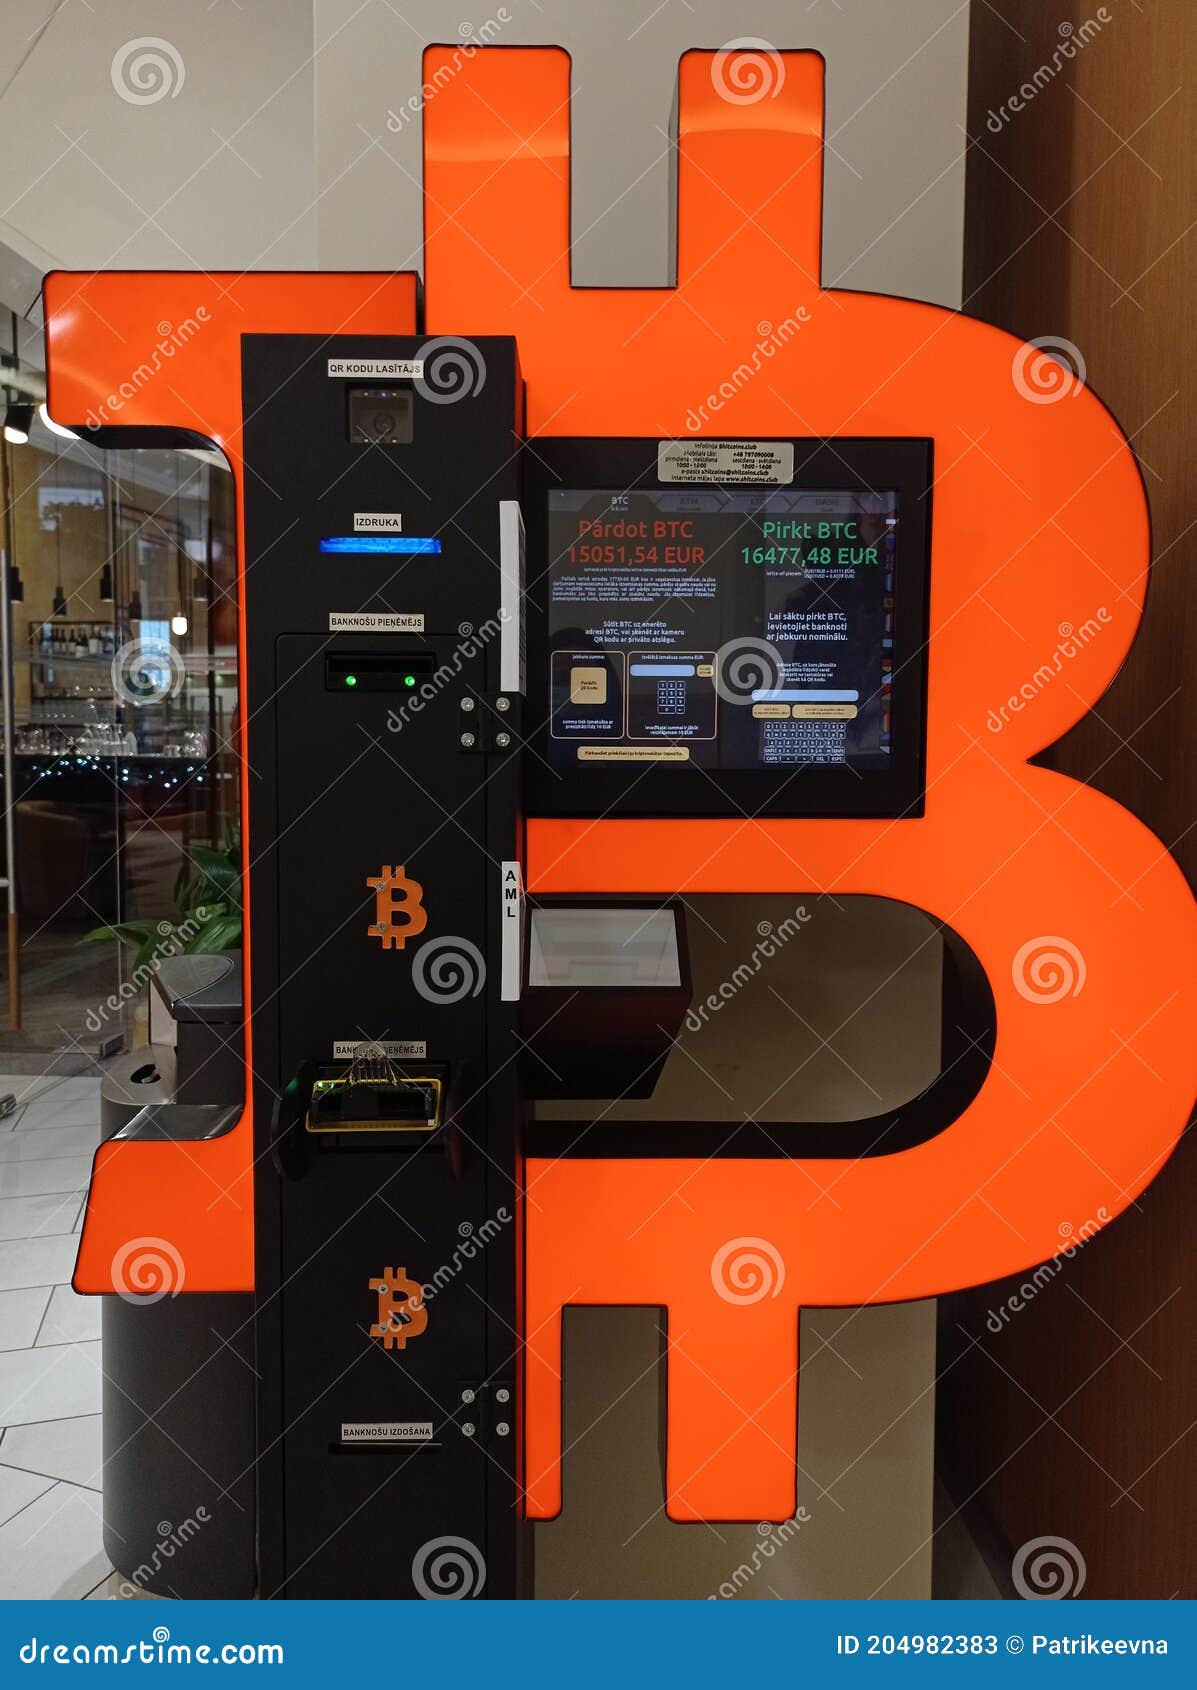 When Was the First Bitcoin ATM Installed?